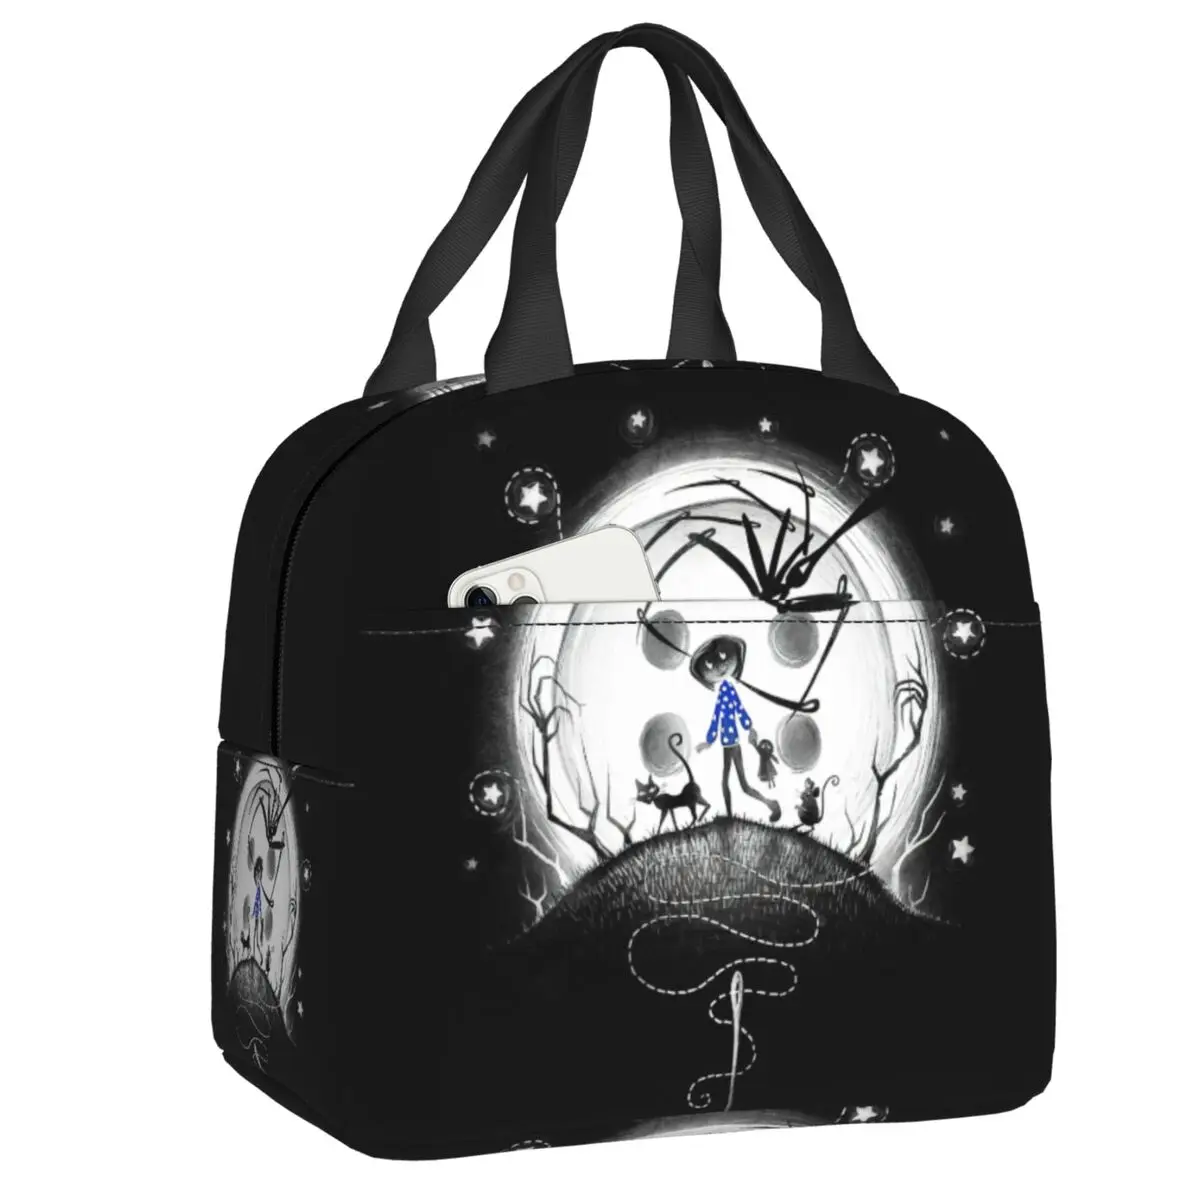 

Coraline Insulated Lunch Bag for School Office Halloween Horror Movie Resuable Thermal Cooler Lunch Box Women Children Food Tote